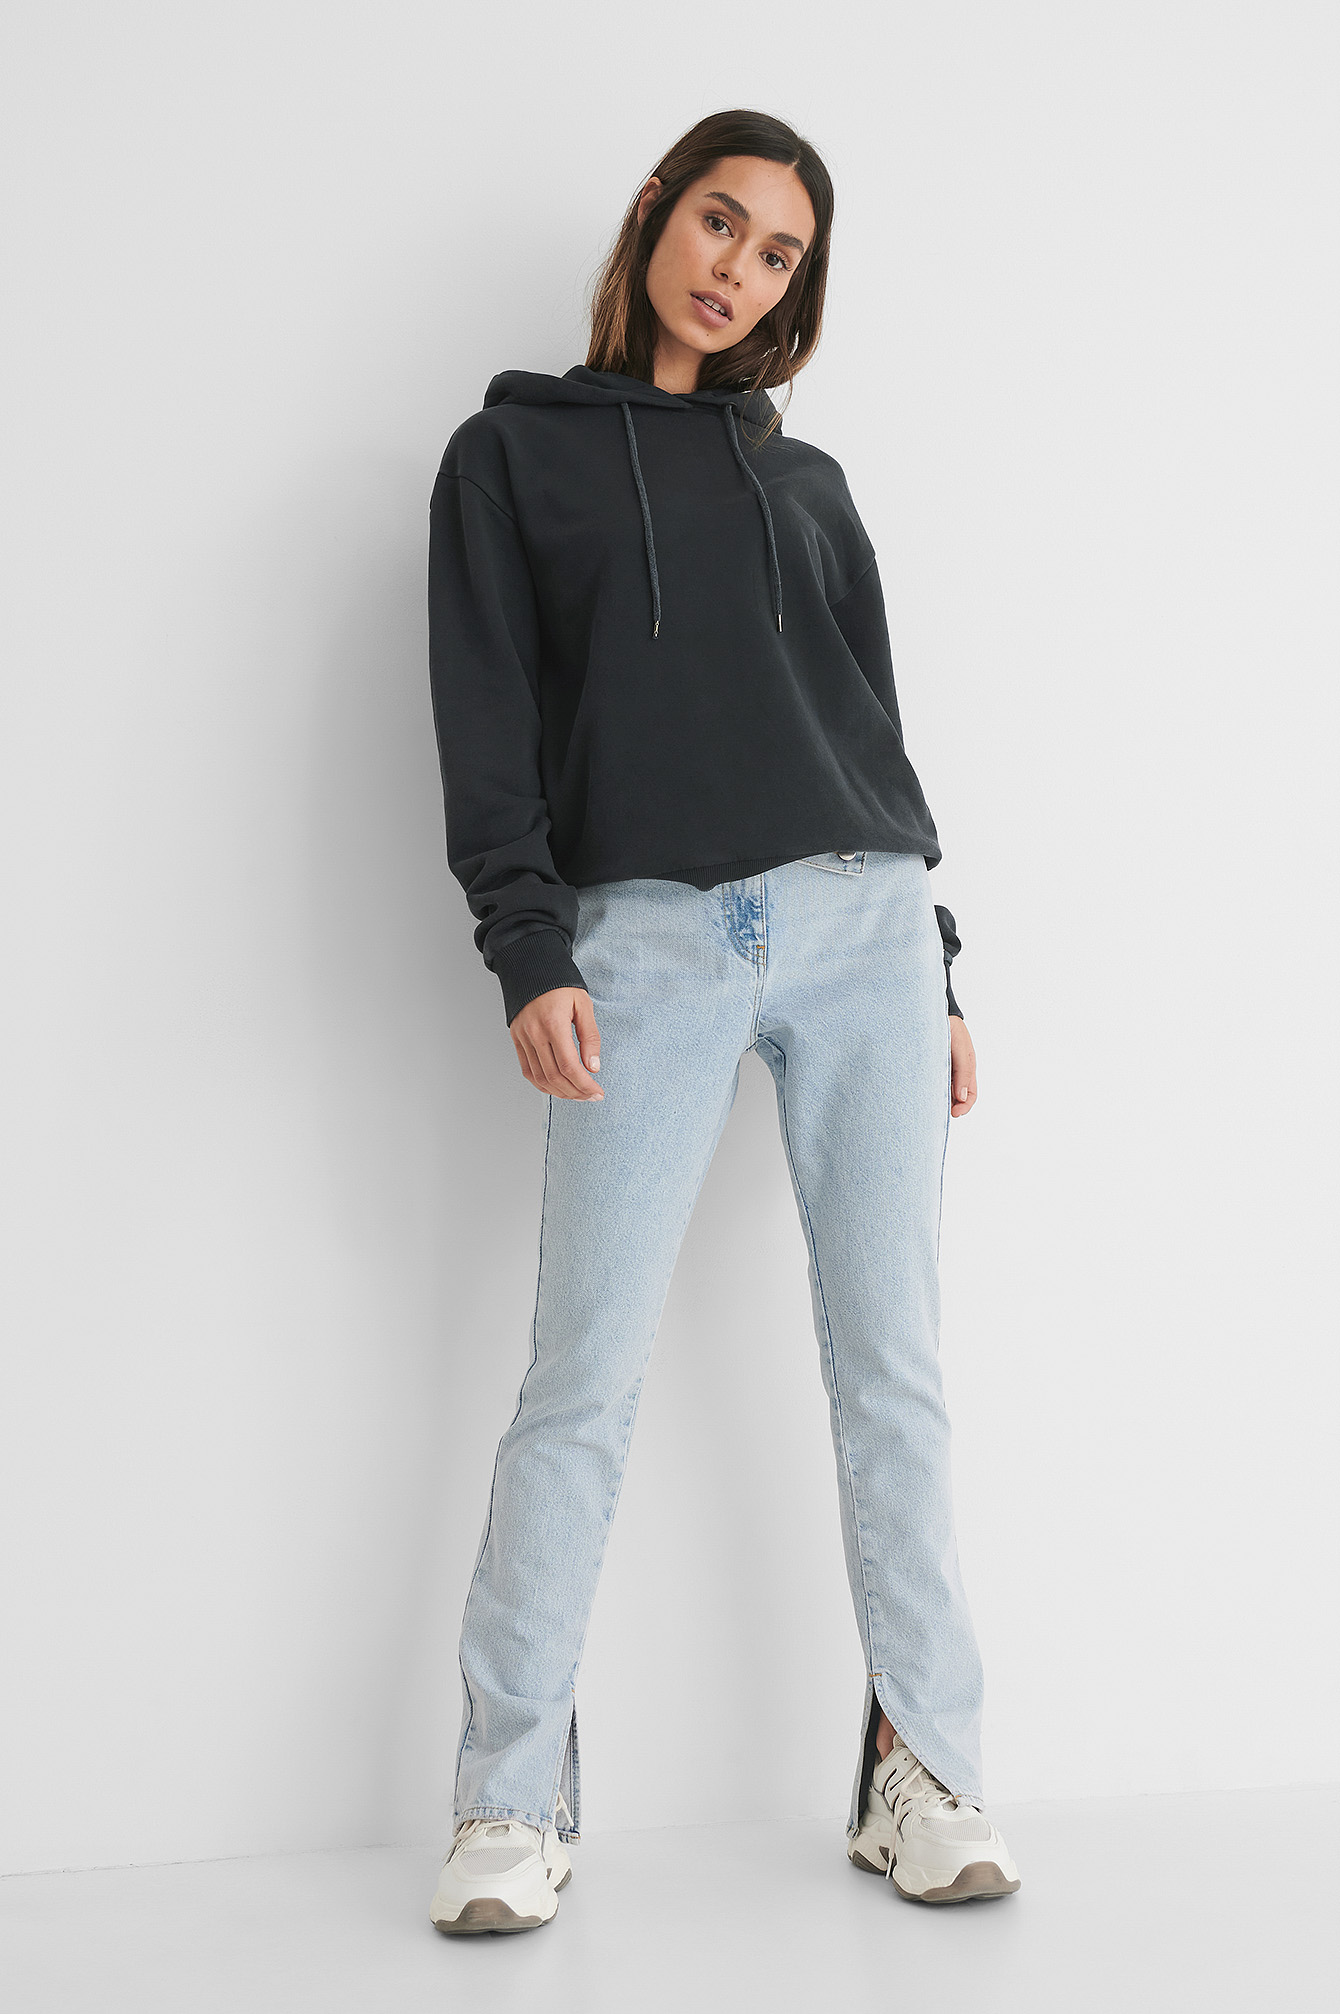 Stone Washed Hoodie with Jeans.